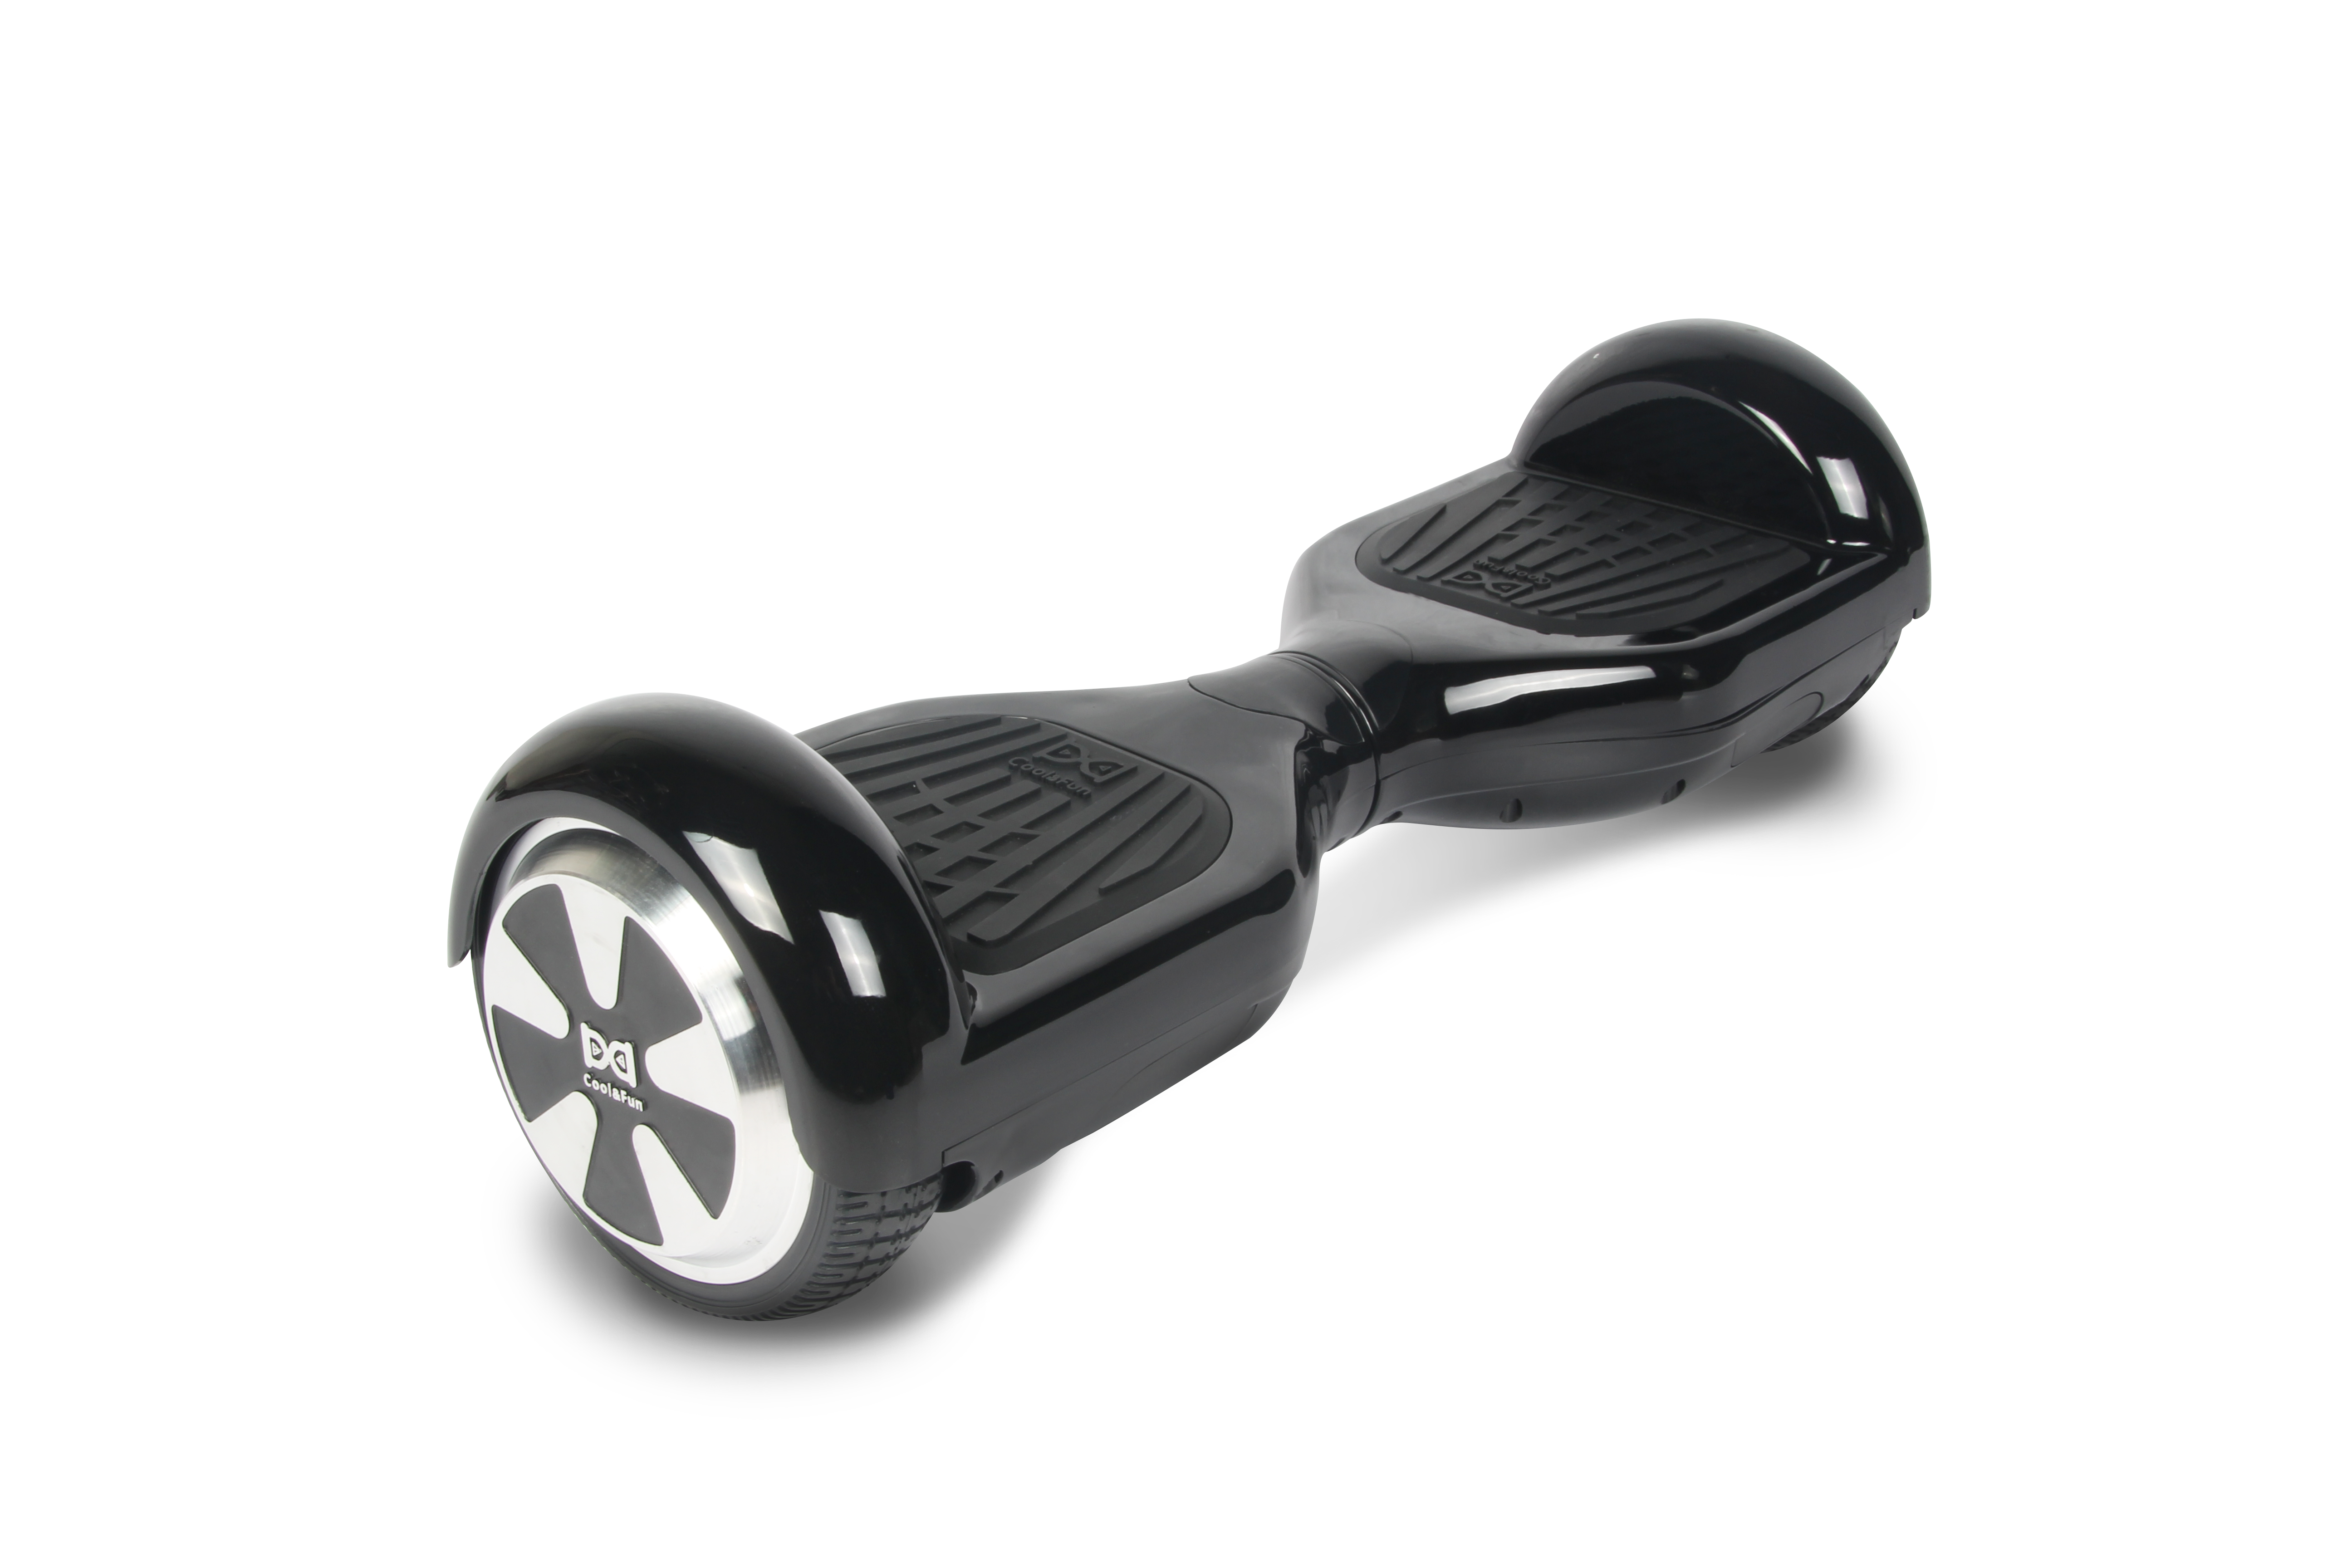 Hoverboard Cool&amp;Fun Smart Balance Waterproof Electric Scooter 6.5 Inch Black